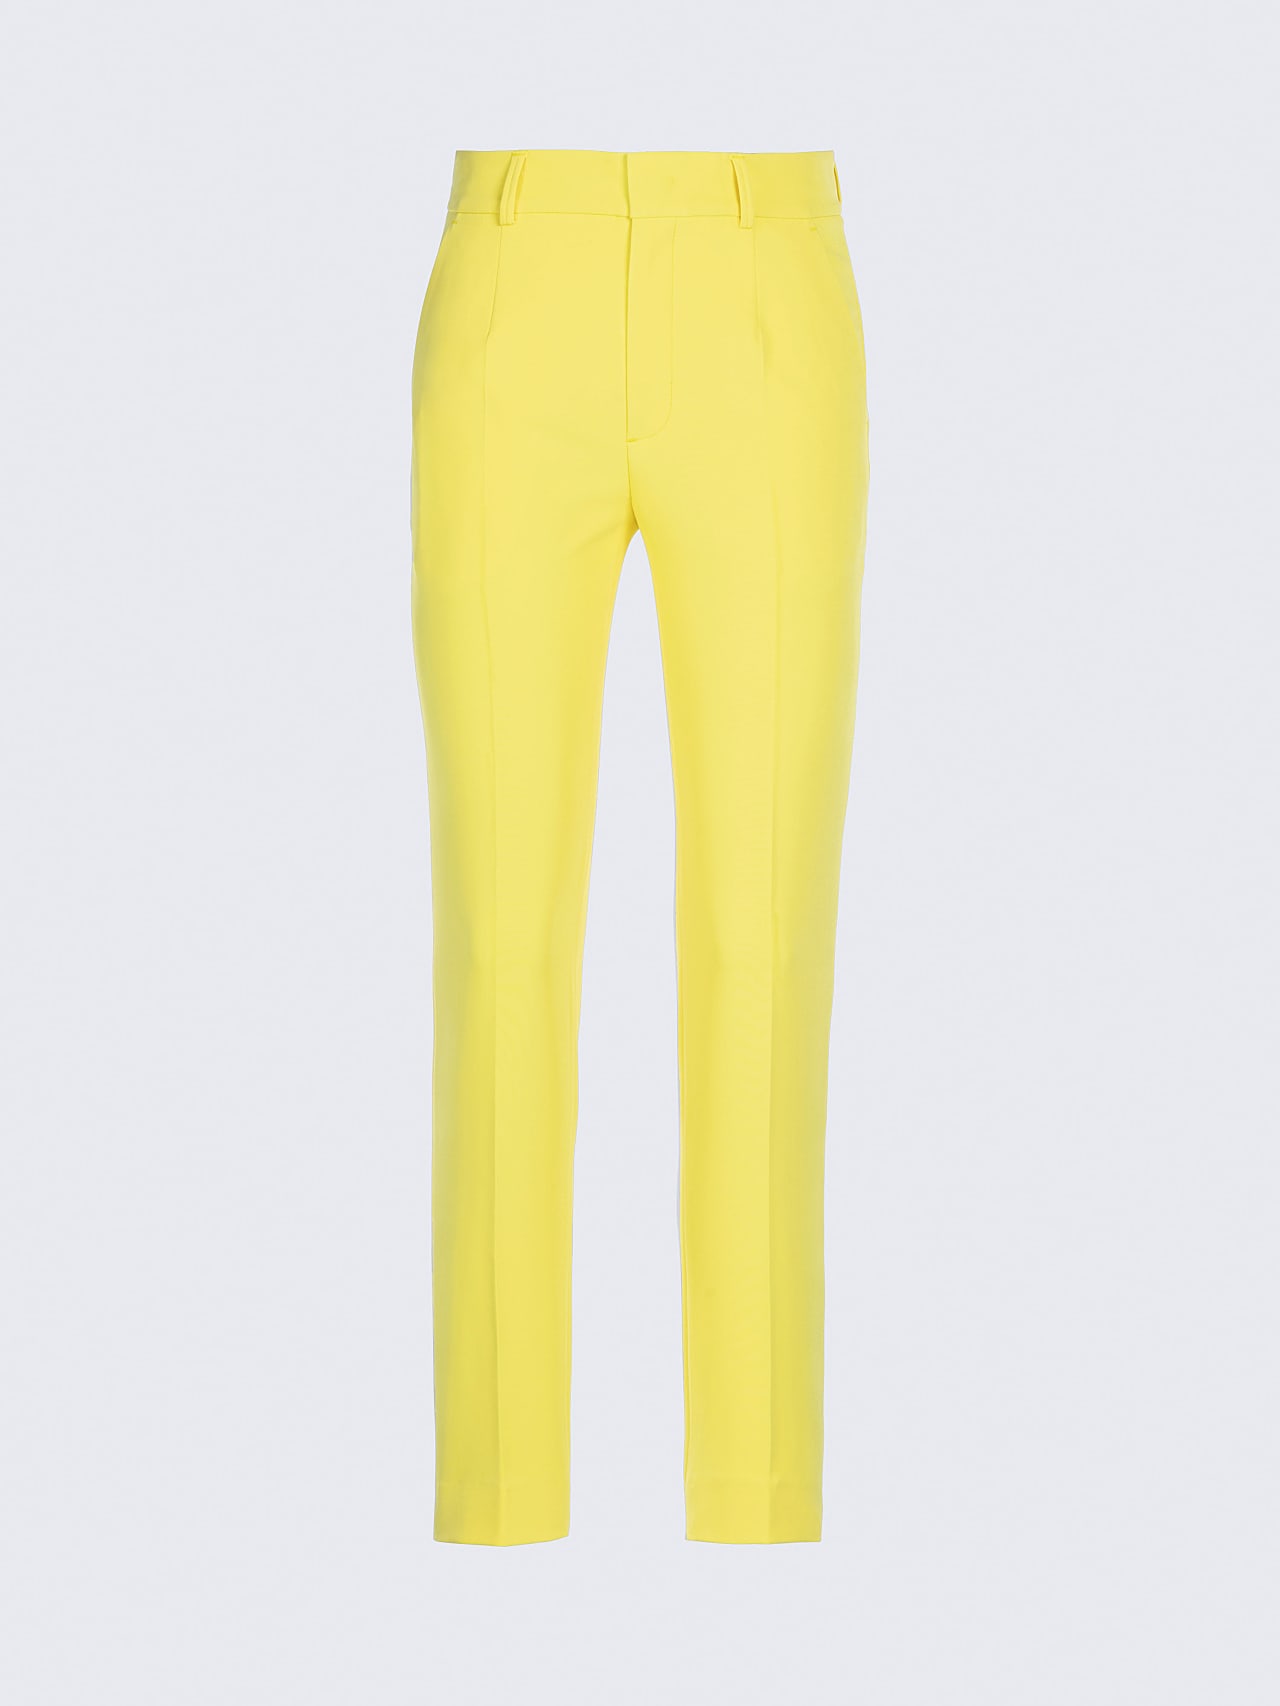 AlphaTauri | PERTI V2.Y6.01 | Water-repellent Tapered Pants in yellow for Women